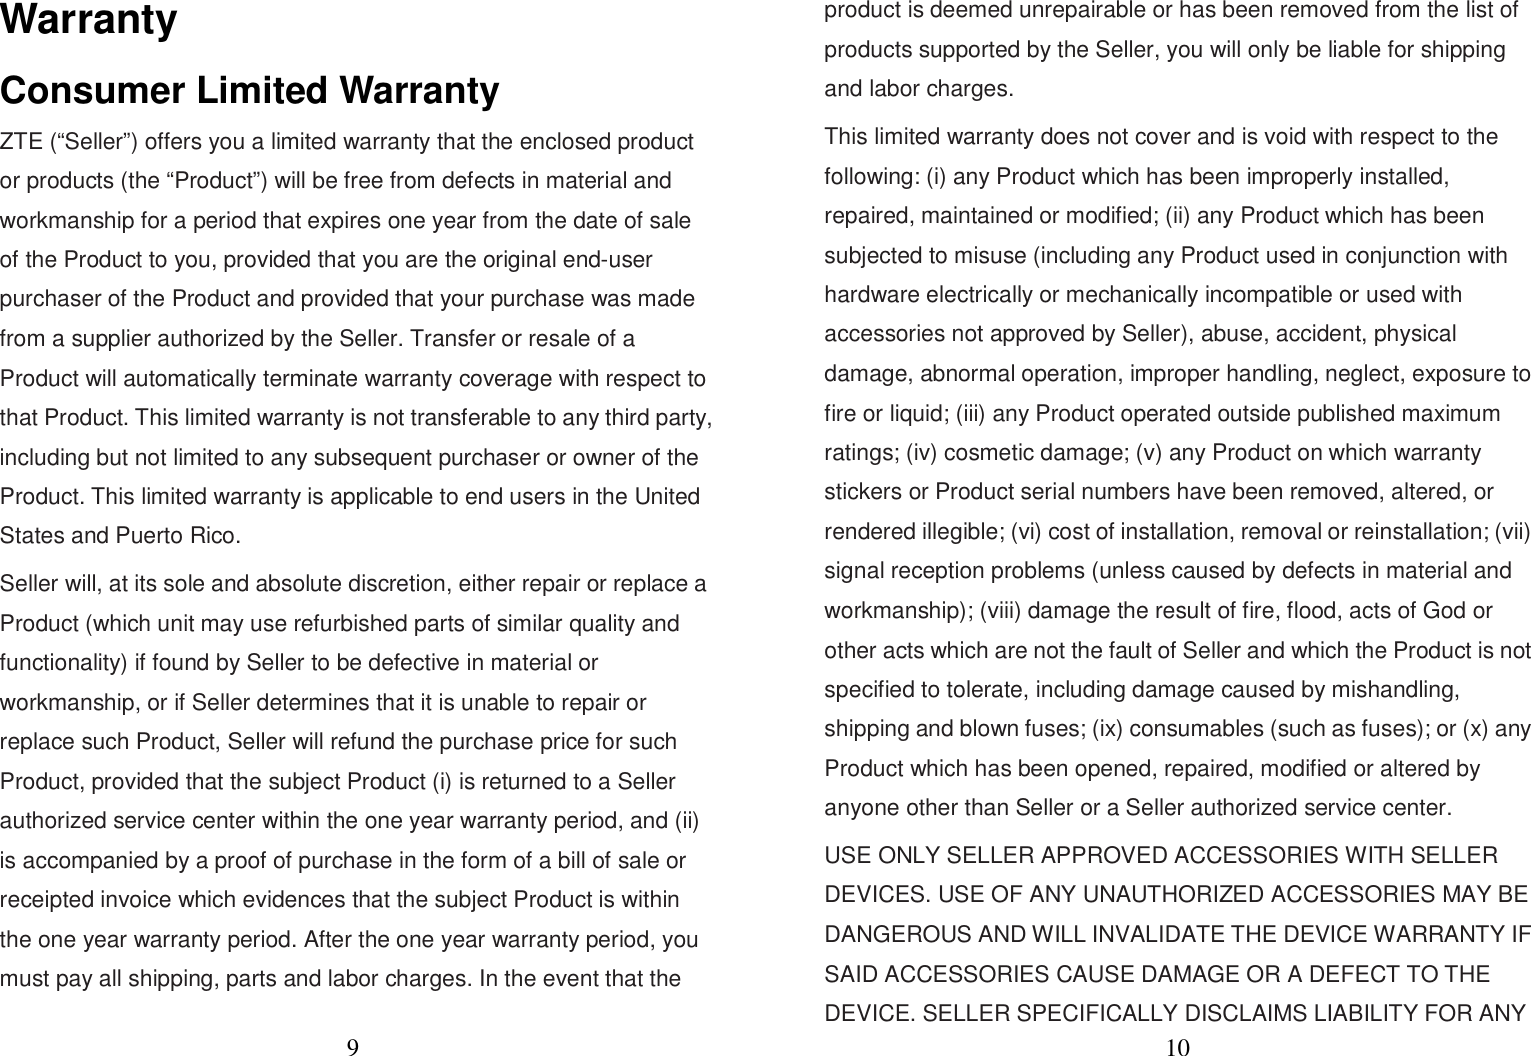 9  Warranty Consumer Limited Warranty ZTE (“Seller”) offers you a limited warranty that the enclosed product or products (the “Product”) will be free from defects in material and workmanship for a period that expires one year from the date of sale of the Product to you, provided that you are the original end-user purchaser of the Product and provided that your purchase was made from a supplier authorized by the Seller. Transfer or resale of a Product will automatically terminate warranty coverage with respect to that Product. This limited warranty is not transferable to any third party, including but not limited to any subsequent purchaser or owner of the Product. This limited warranty is applicable to end users in the United States and Puerto Rico. Seller will, at its sole and absolute discretion, either repair or replace a Product (which unit may use refurbished parts of similar quality and functionality) if found by Seller to be defective in material or workmanship, or if Seller determines that it is unable to repair or replace such Product, Seller will refund the purchase price for such Product, provided that the subject Product (i) is returned to a Seller authorized service center within the one year warranty period, and (ii) is accompanied by a proof of purchase in the form of a bill of sale or receipted invoice which evidences that the subject Product is within the one year warranty period. After the one year warranty period, you must pay all shipping, parts and labor charges. In the event that the 10  product is deemed unrepairable or has been removed from the list of products supported by the Seller, you will only be liable for shipping and labor charges. This limited warranty does not cover and is void with respect to the following: (i) any Product which has been improperly installed, repaired, maintained or modified; (ii) any Product which has been subjected to misuse (including any Product used in conjunction with hardware electrically or mechanically incompatible or used with accessories not approved by Seller), abuse, accident, physical damage, abnormal operation, improper handling, neglect, exposure to fire or liquid; (iii) any Product operated outside published maximum ratings; (iv) cosmetic damage; (v) any Product on which warranty stickers or Product serial numbers have been removed, altered, or rendered illegible; (vi) cost of installation, removal or reinstallation; (vii) signal reception problems (unless caused by defects in material and workmanship); (viii) damage the result of fire, flood, acts of God or other acts which are not the fault of Seller and which the Product is not specified to tolerate, including damage caused by mishandling, shipping and blown fuses; (ix) consumables (such as fuses); or (x) any Product which has been opened, repaired, modified or altered by anyone other than Seller or a Seller authorized service center. USE ONLY SELLER APPROVED ACCESSORIES WITH SELLER DEVICES. USE OF ANY UNAUTHORIZED ACCESSORIES MAY BE DANGEROUS AND WILL INVALIDATE THE DEVICE WARRANTY IF SAID ACCESSORIES CAUSE DAMAGE OR A DEFECT TO THE DEVICE. SELLER SPECIFICALLY DISCLAIMS LIABILITY FOR ANY   